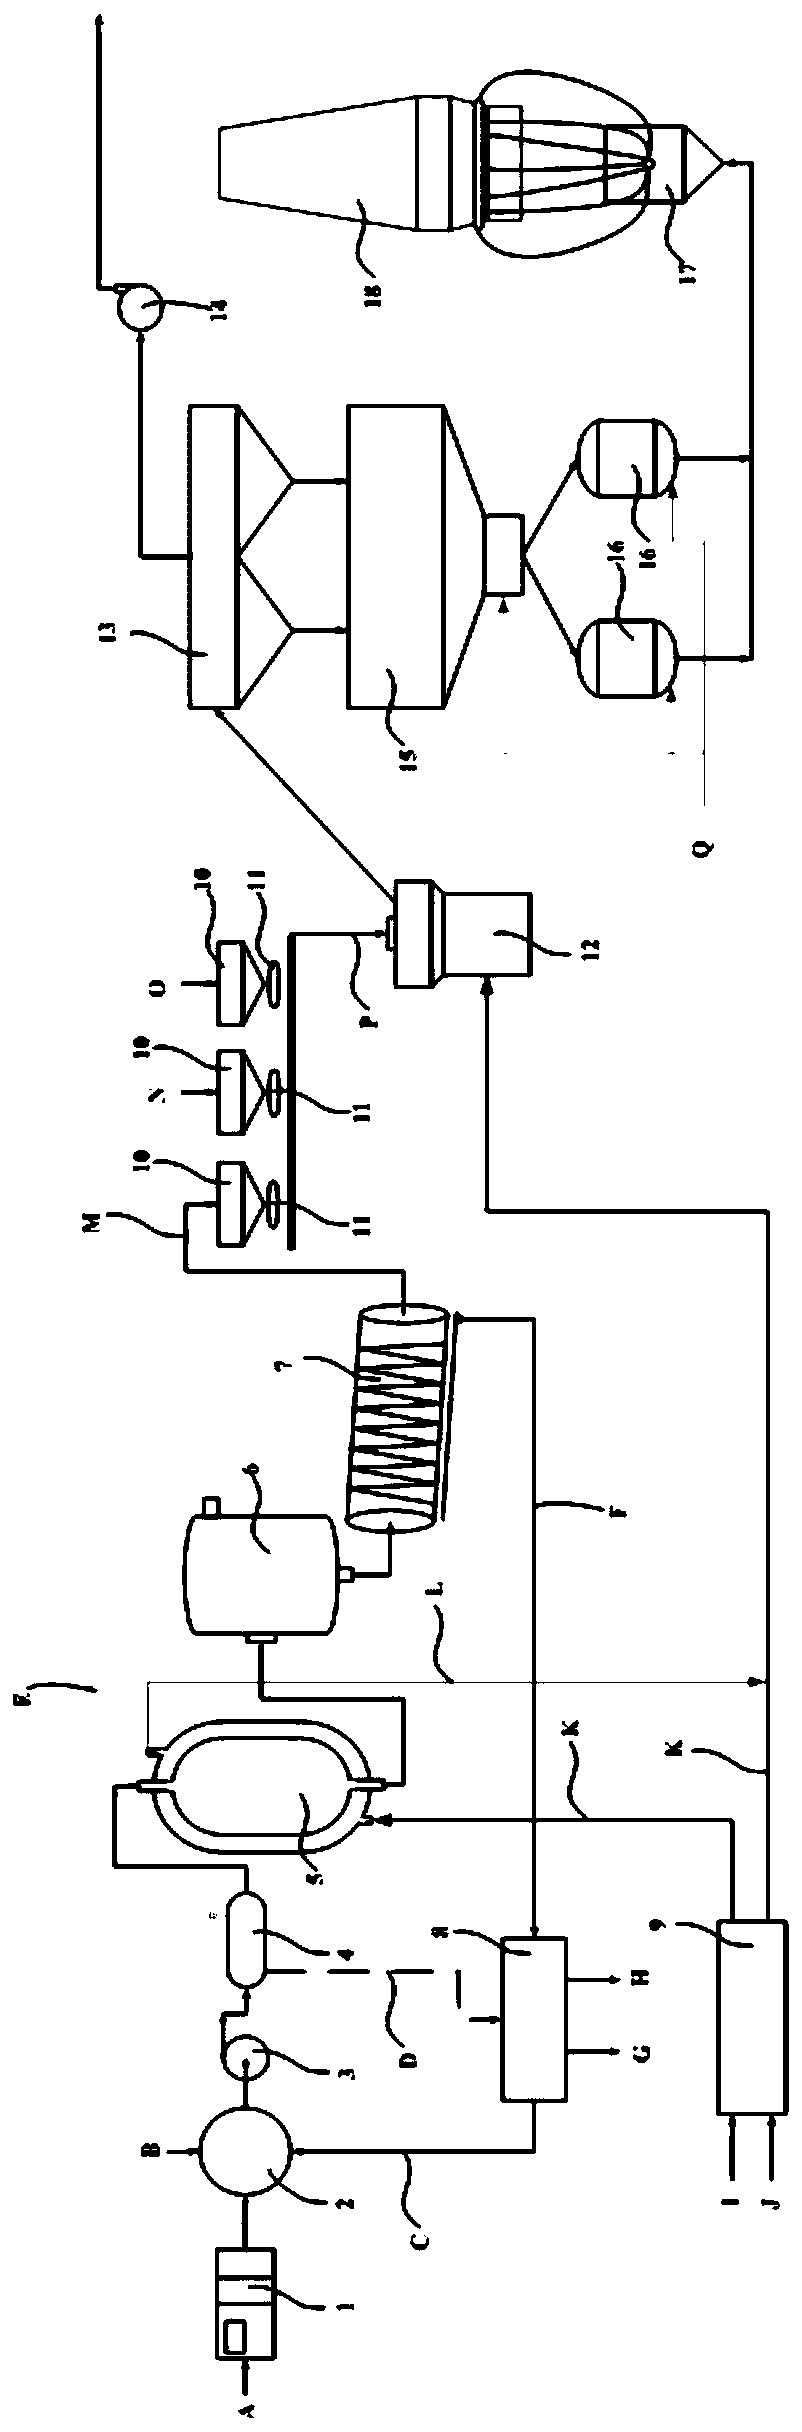 Method for carrying out blast furnace blowing on biomass hydrothermal carbon